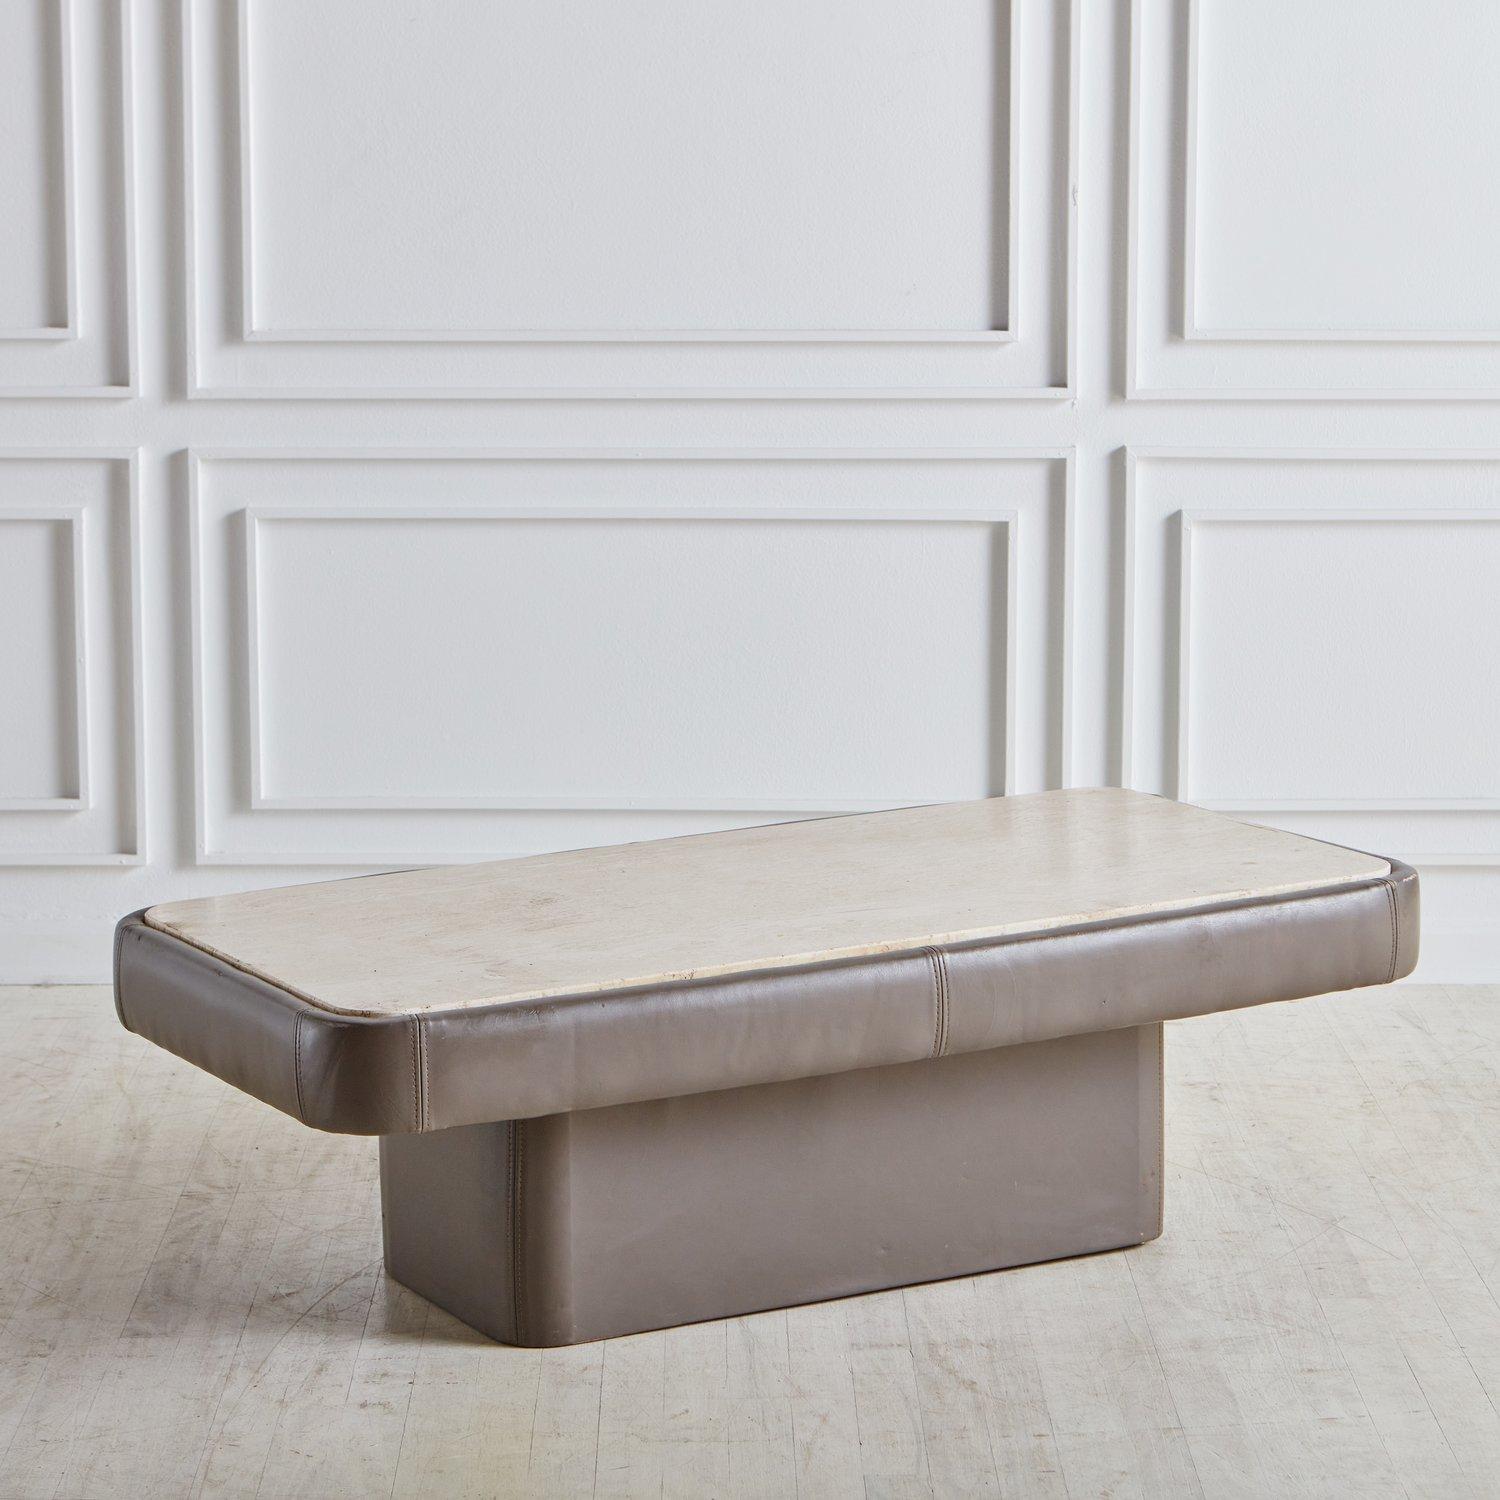 A beautiful vintage coffee table attributed to De Sede featuring a gray leather clad frame with a rectangular pedestal base and stitch detailing. This piece has an inset travertine table top with rounded corners and elegant veining. Sourced in